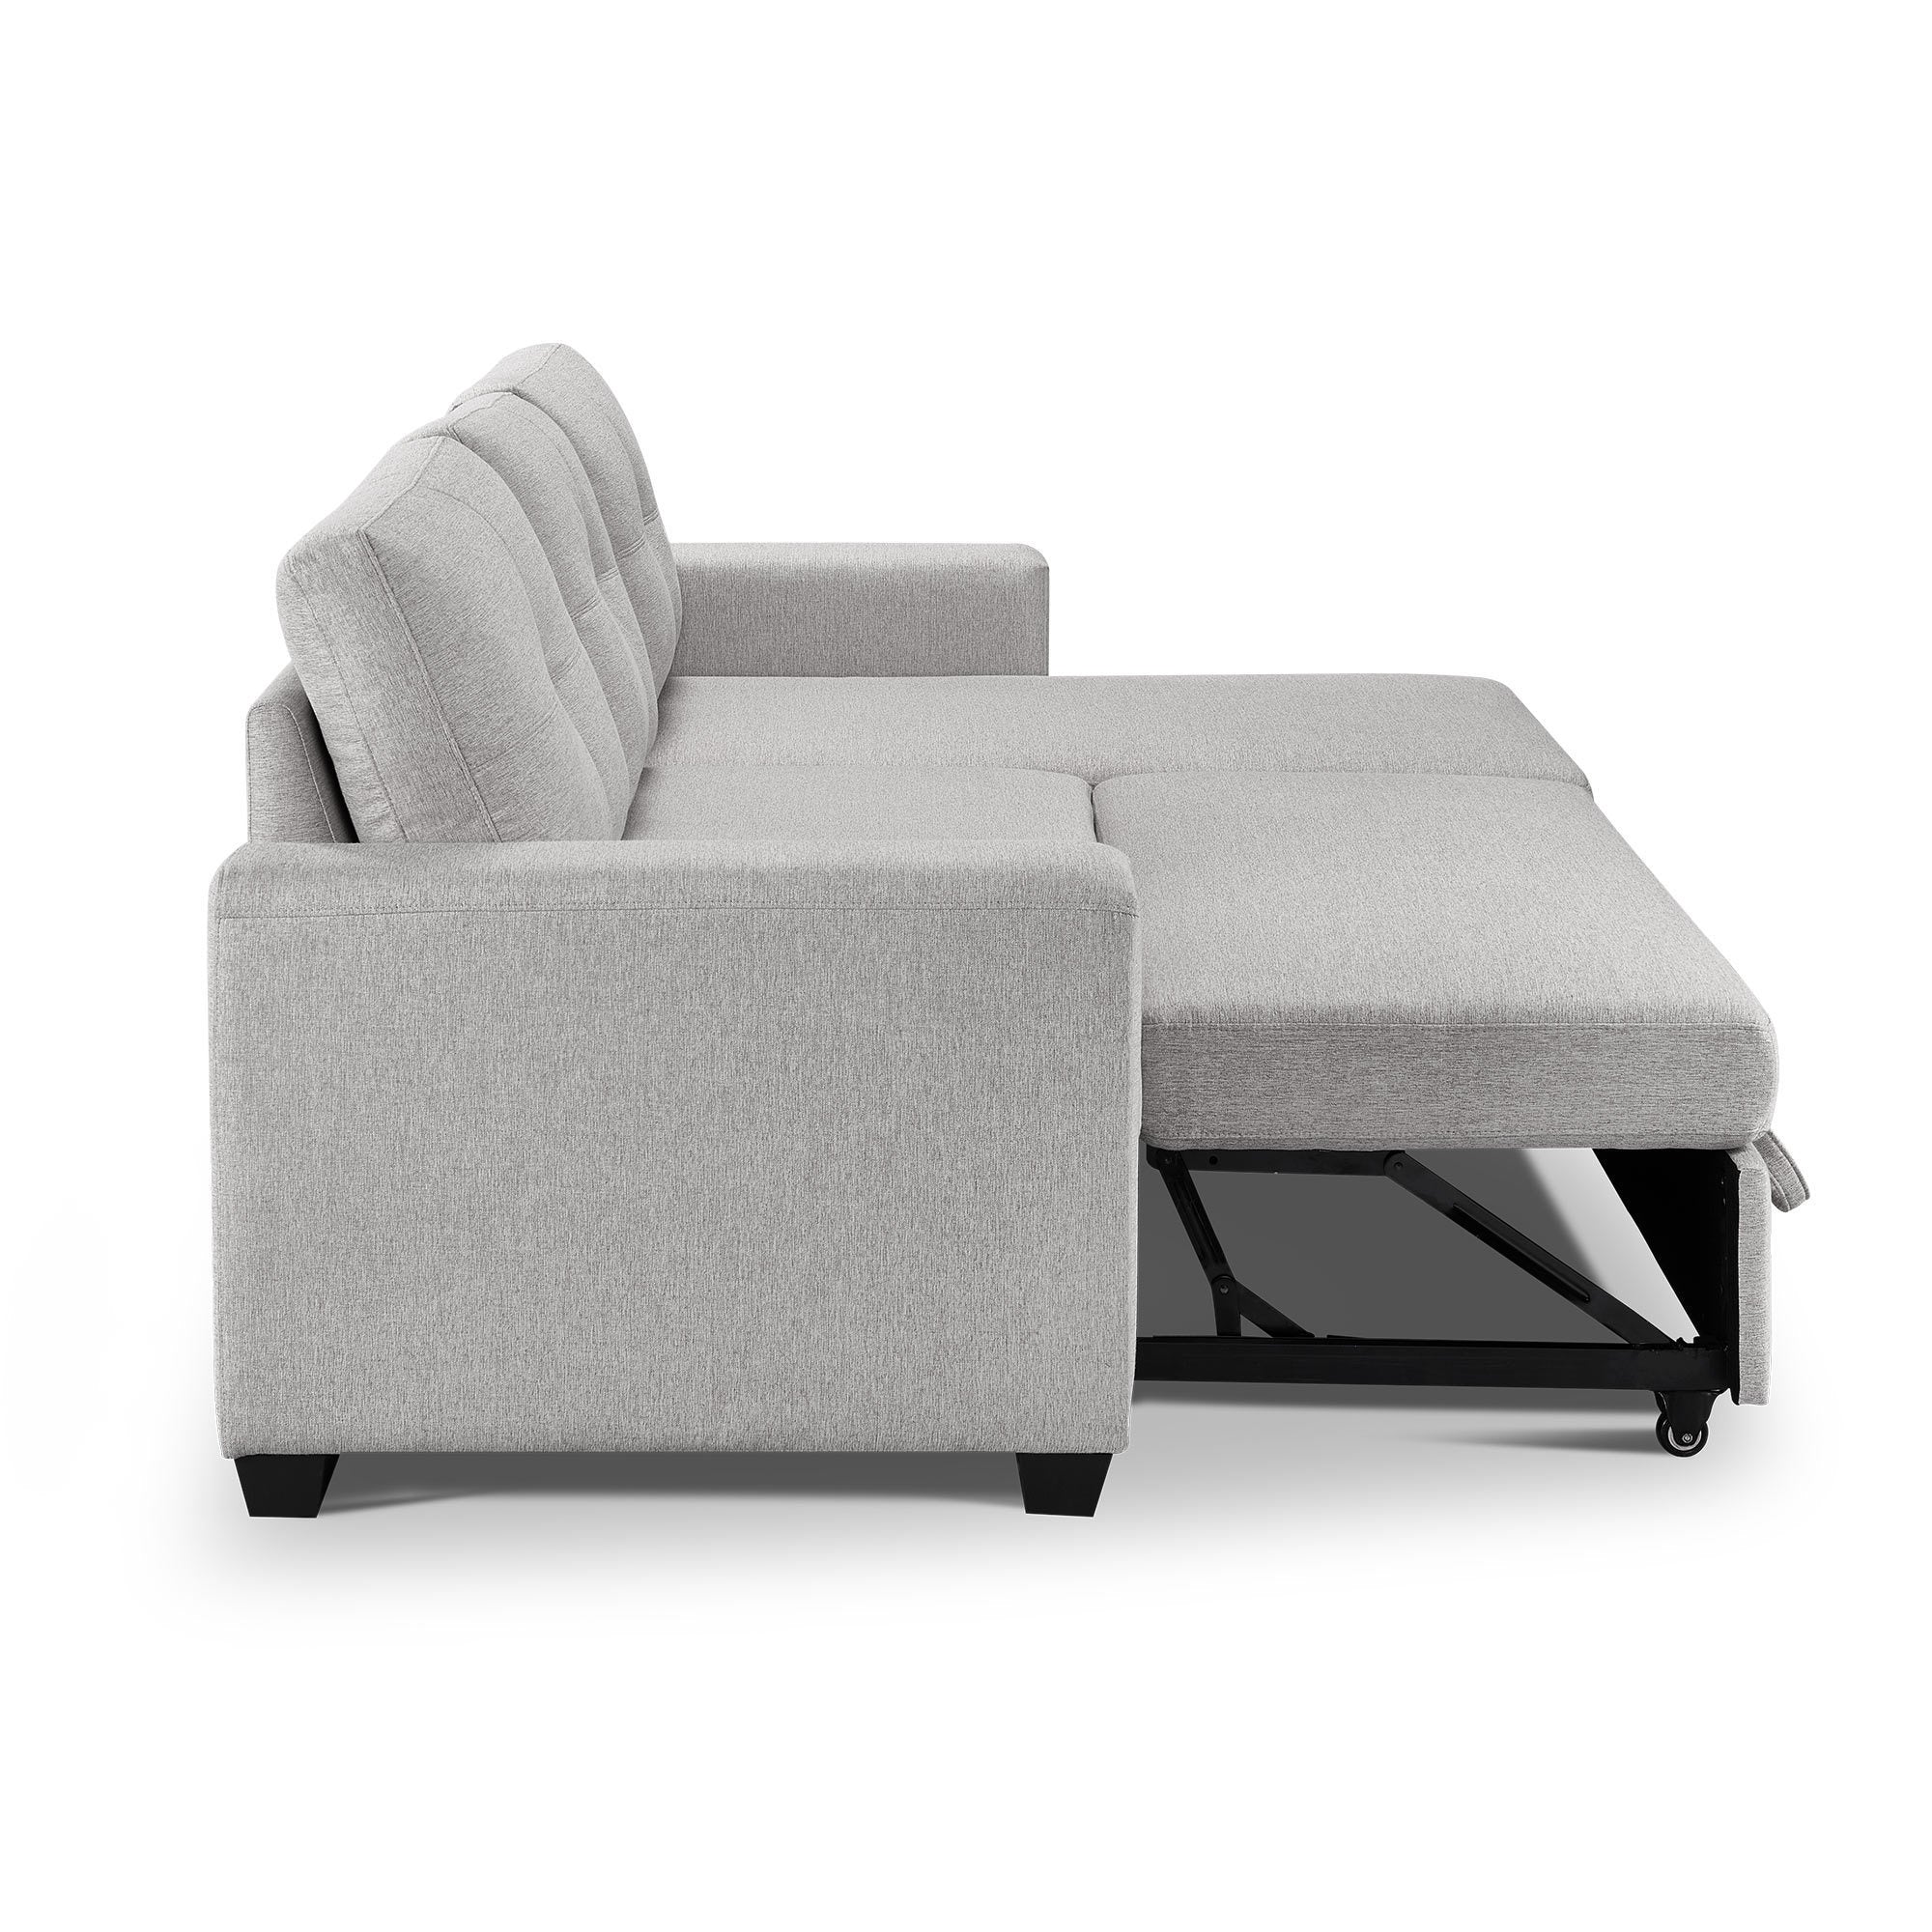 91.7" L-Shape Sleeper Sectional Sofa w/Storage Chaise - Light Grey Fabric-Sleeper Sectionals-American Furniture Outlet